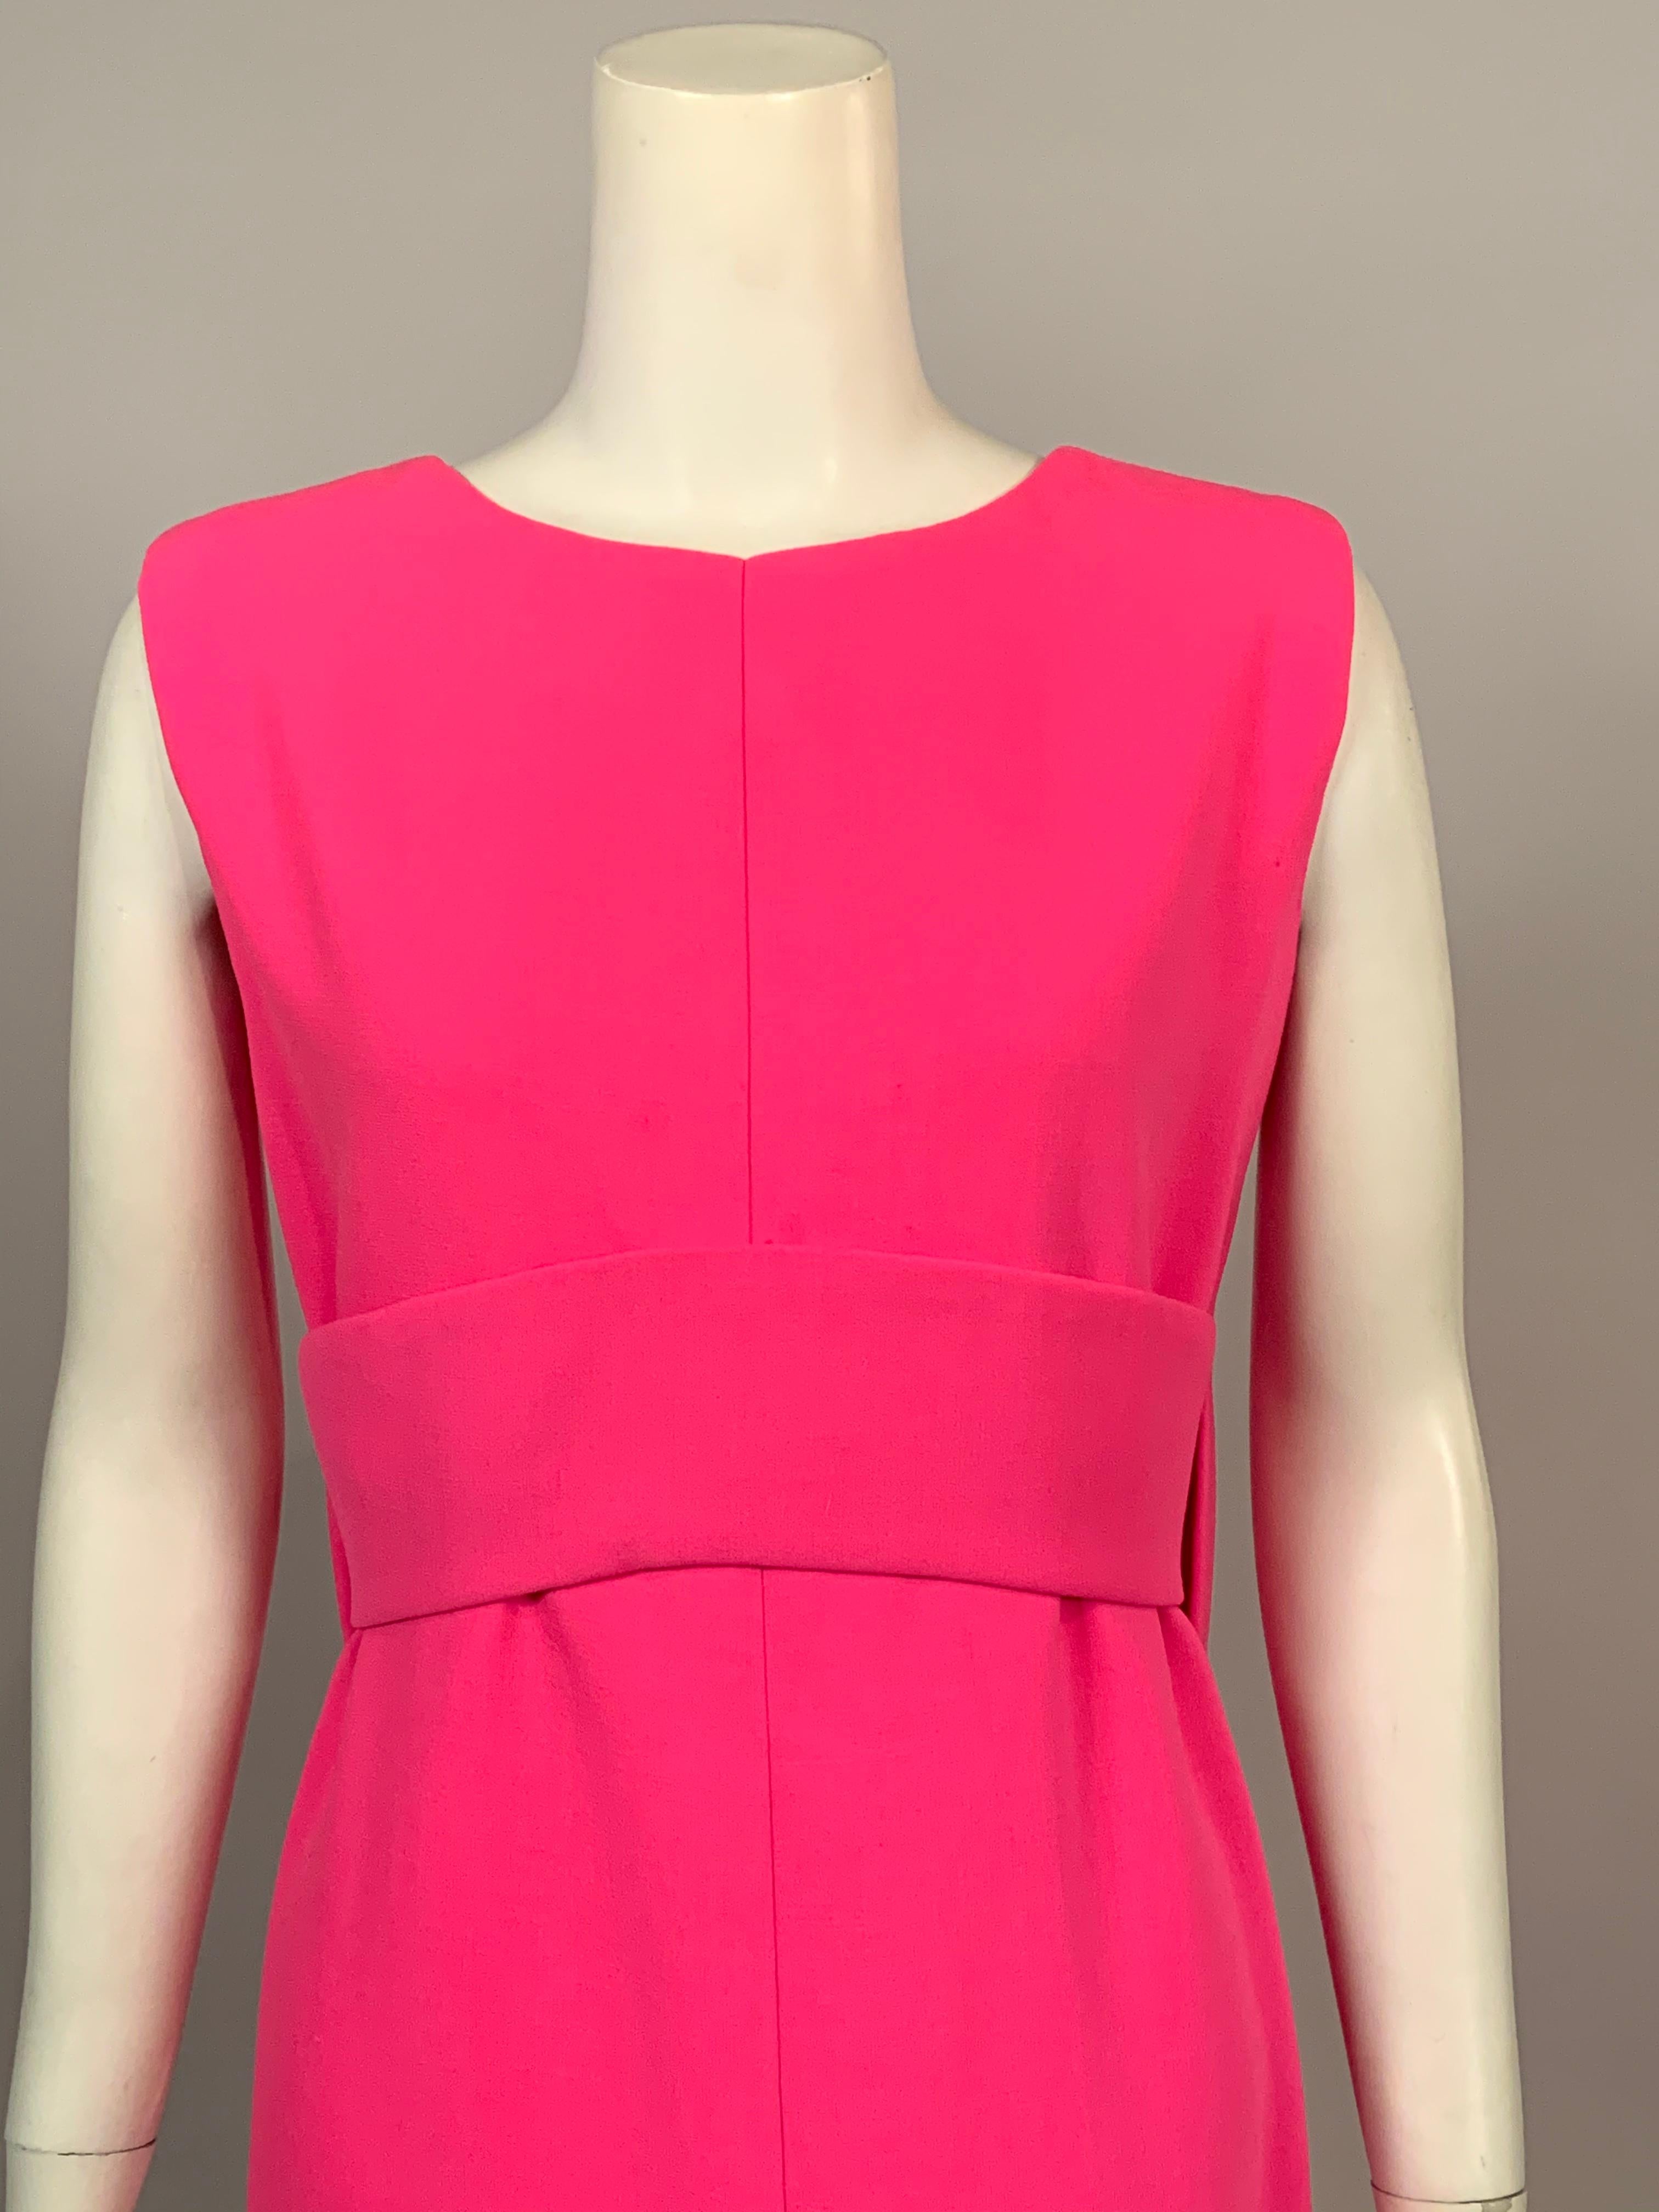 This classic bright pink wool crepe evening dress from Norman Norell is as stylish today as it was in the 1960's, and it is a perfect backdrop for your favorite jewelry. The sleeveless dress has a round neckline and an Empire waist created by a wide